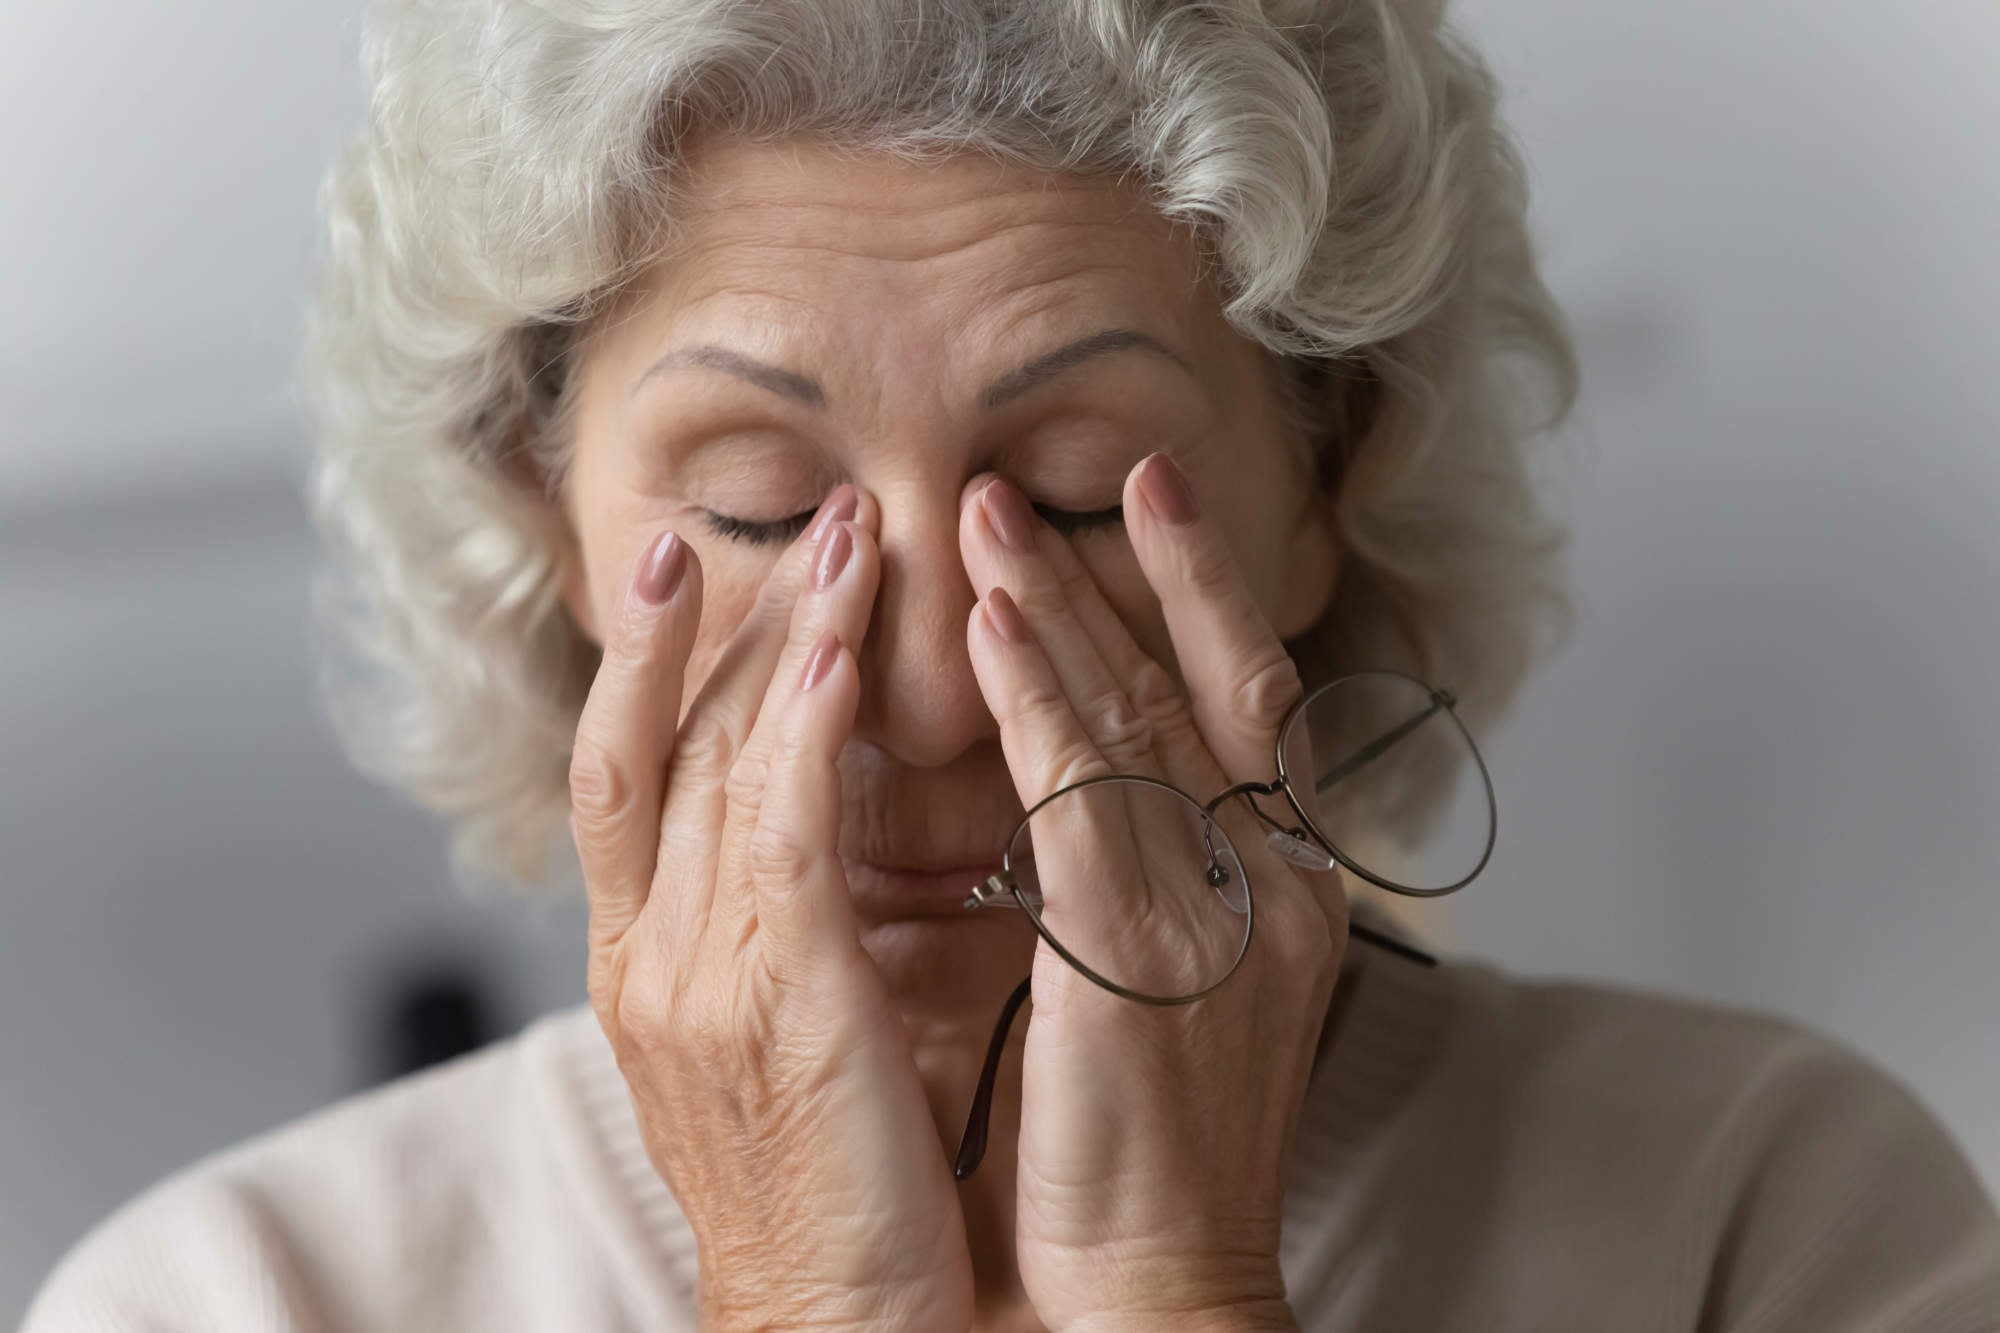 7 Signs You May Have Advanced Mental Decline